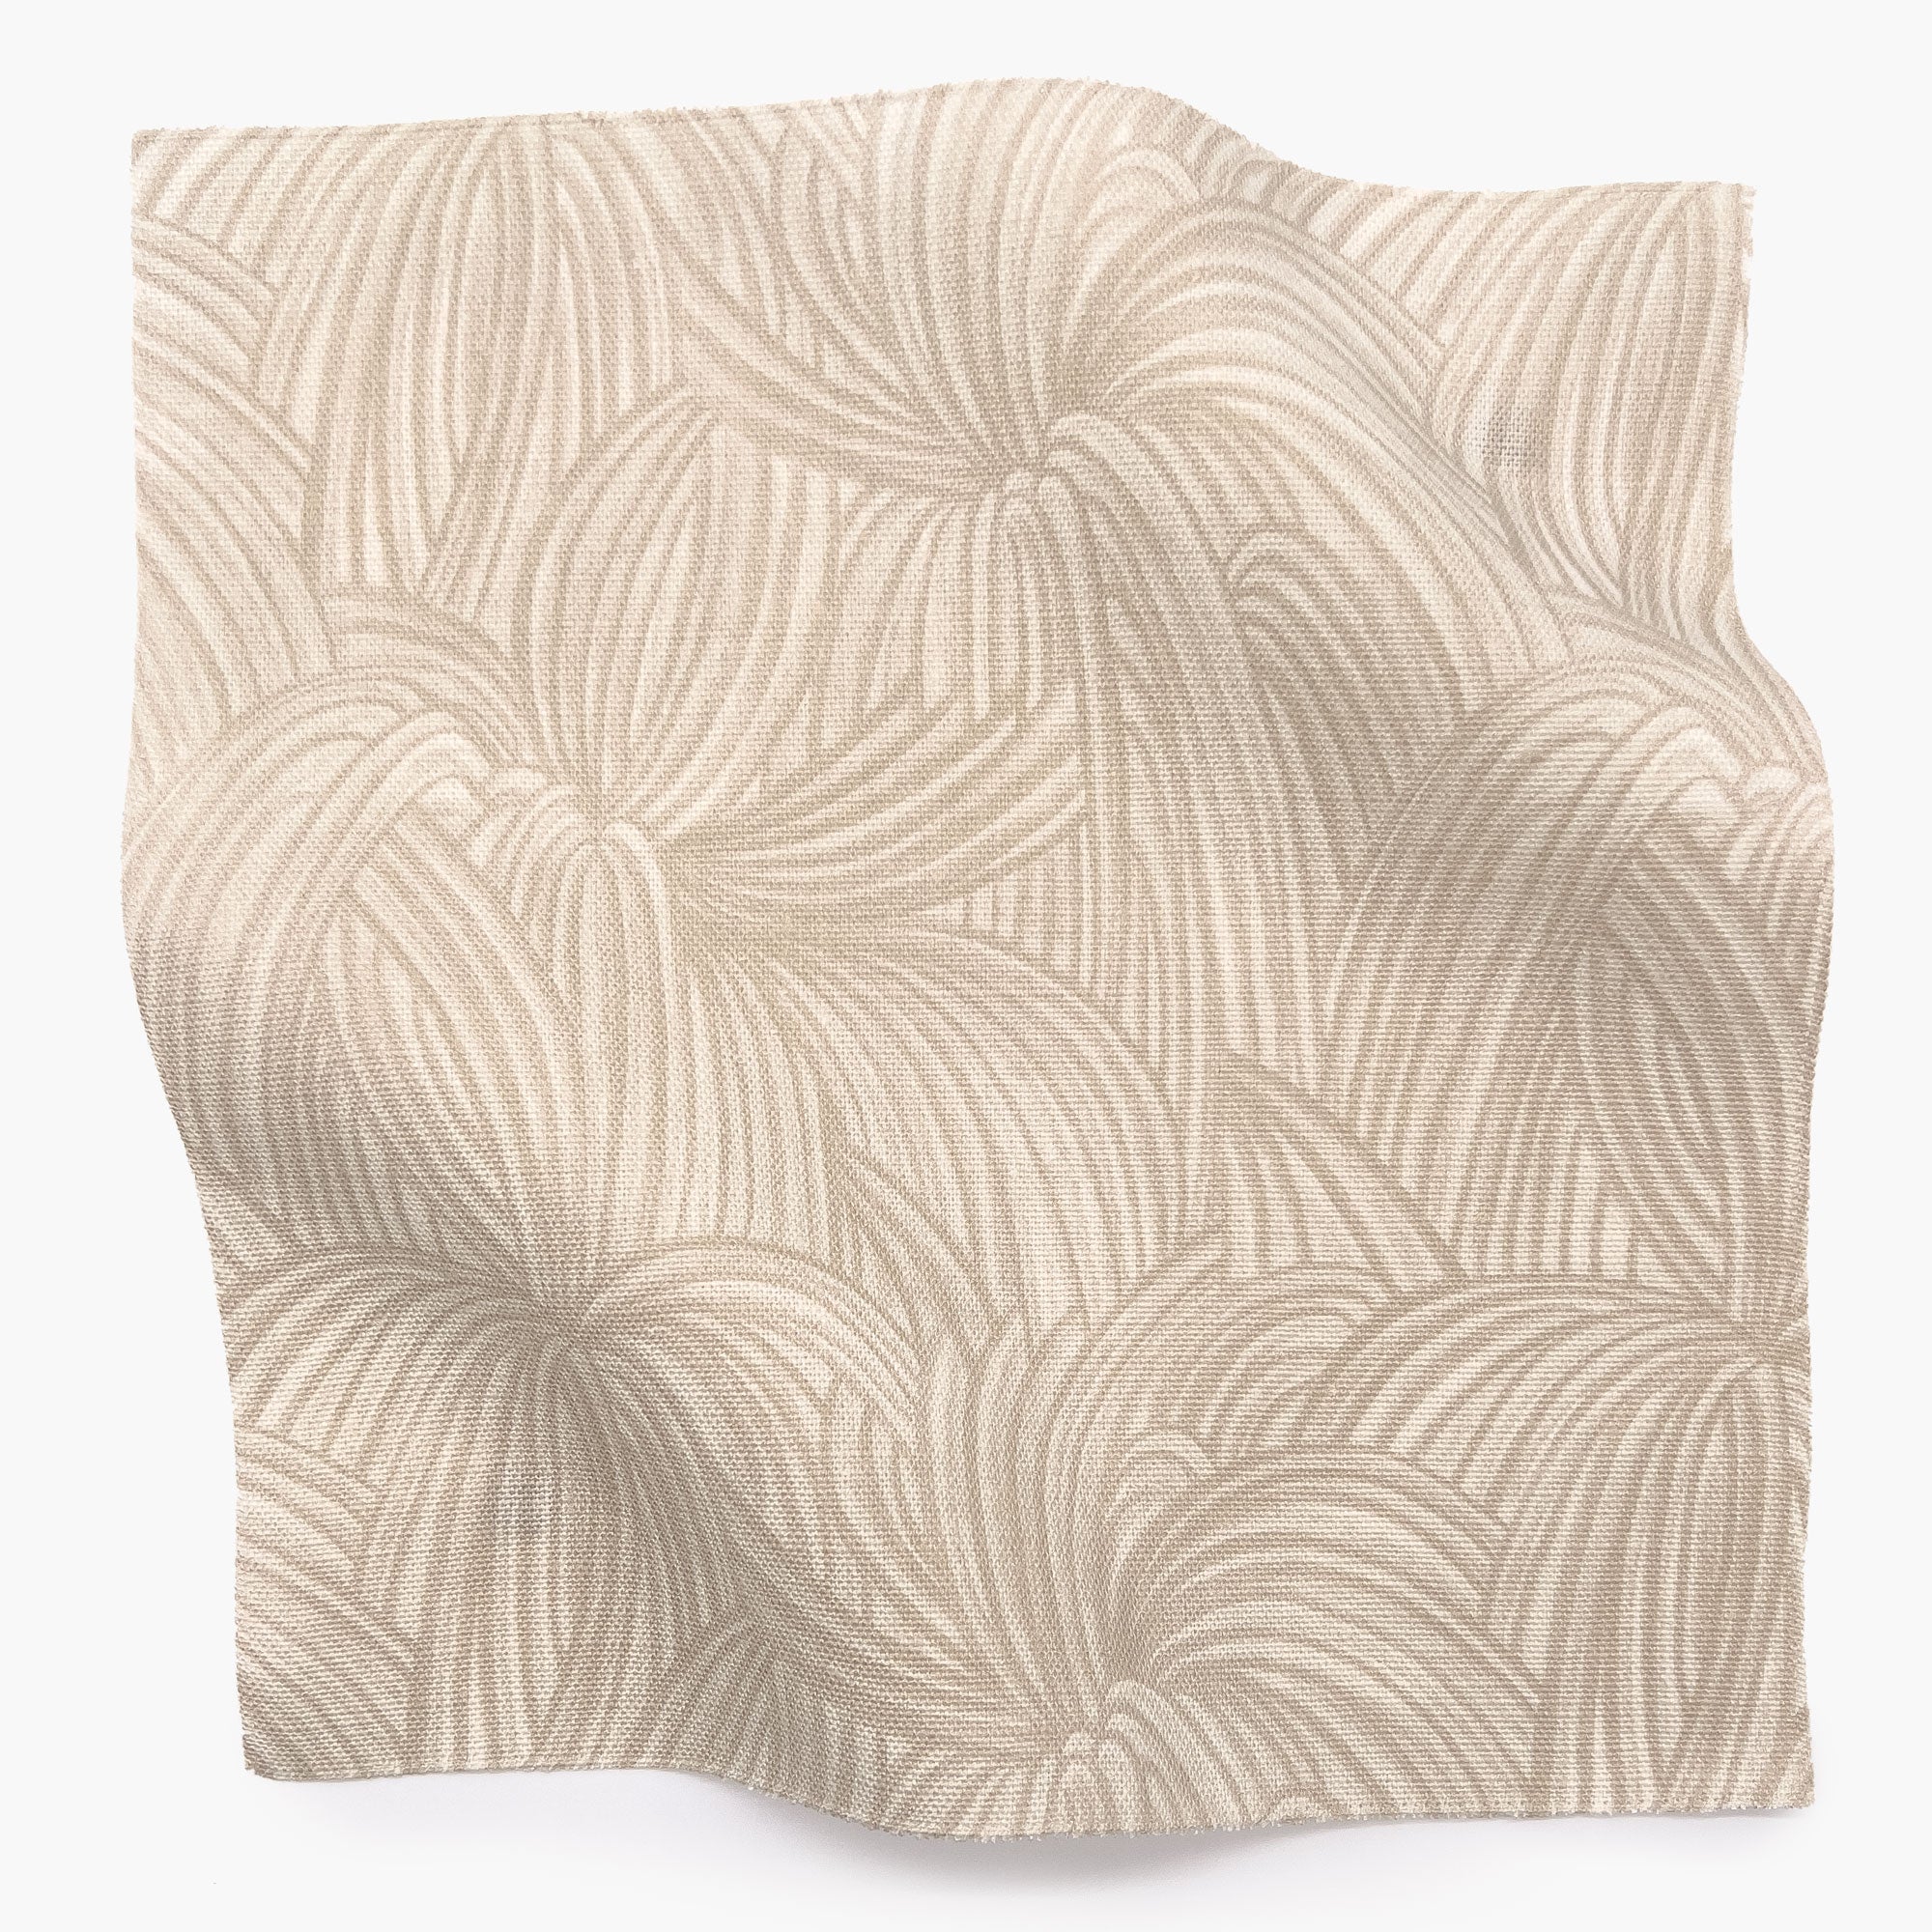 Square fabric swatch in a textural painted print in tan on a cream field.